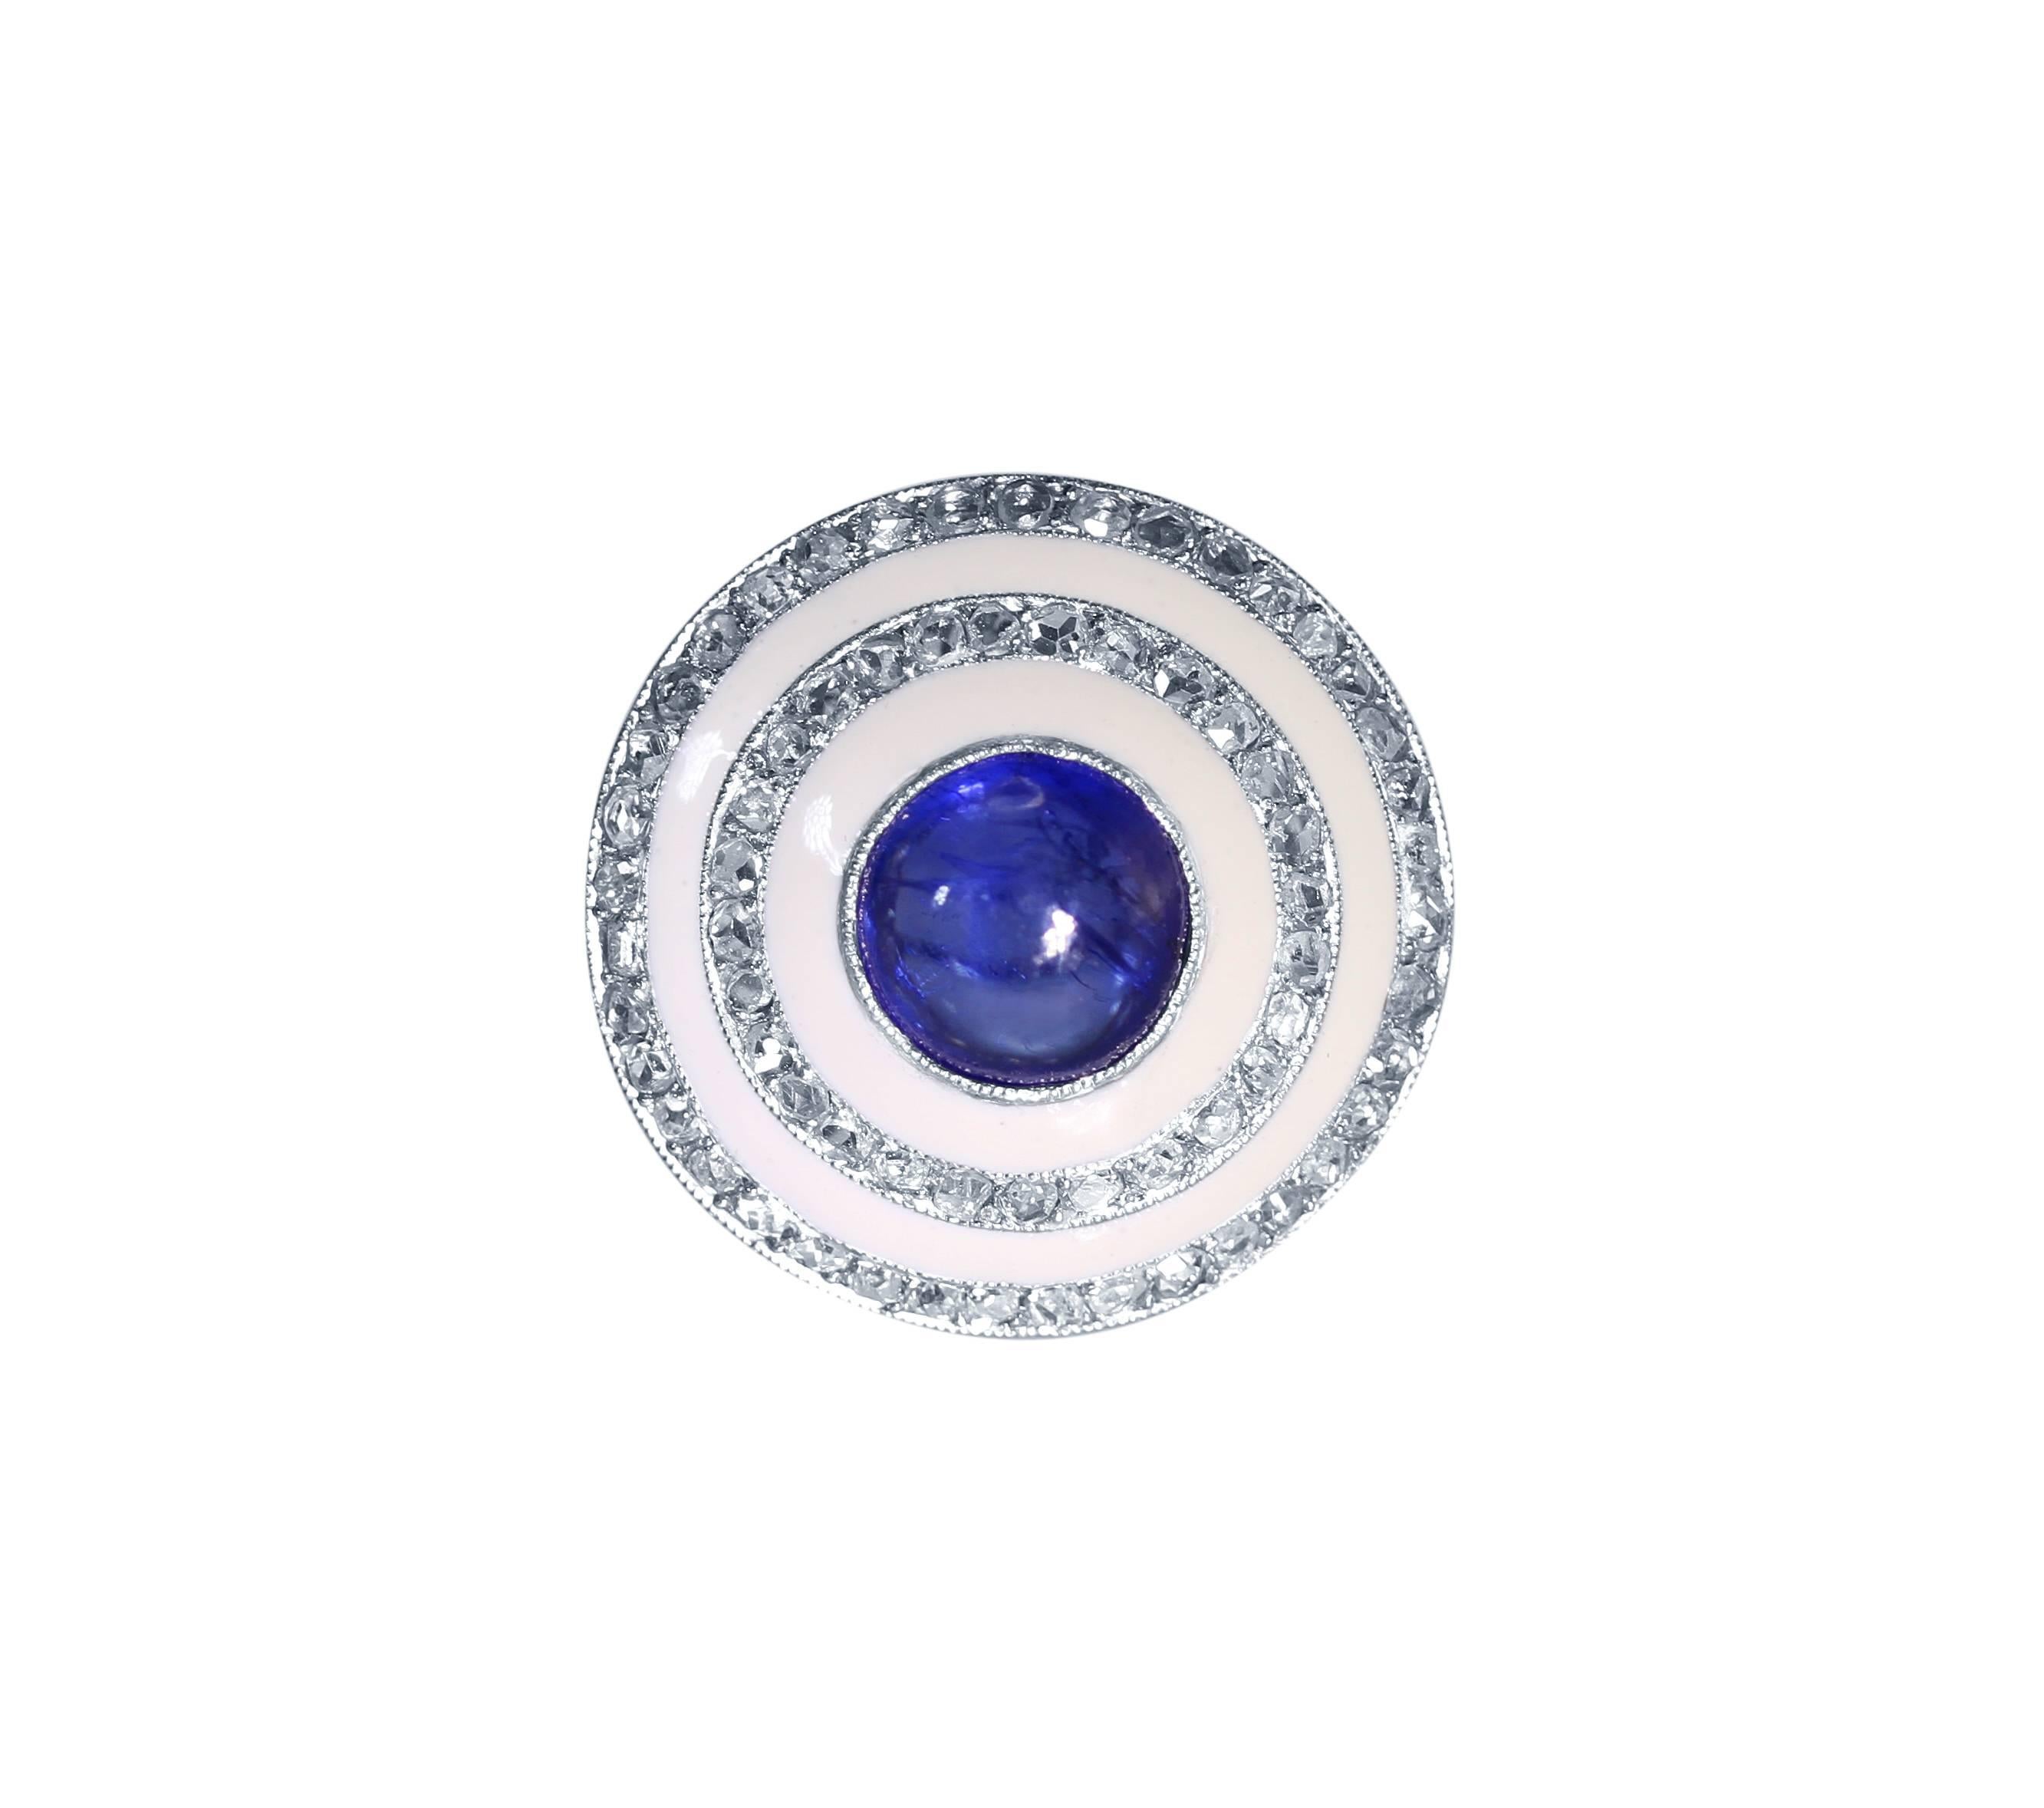 Edwardian Platinum, Sapphire, Diamond and White Enamel Ring
• Center bezel-set with a round cabochon sapphire approximately 4.00 carats
• 80 rose cut diamonds weighing approximately 1.20 carats
• Size 8 1/2, gross weight of 9.7 grams, measuring 7/8